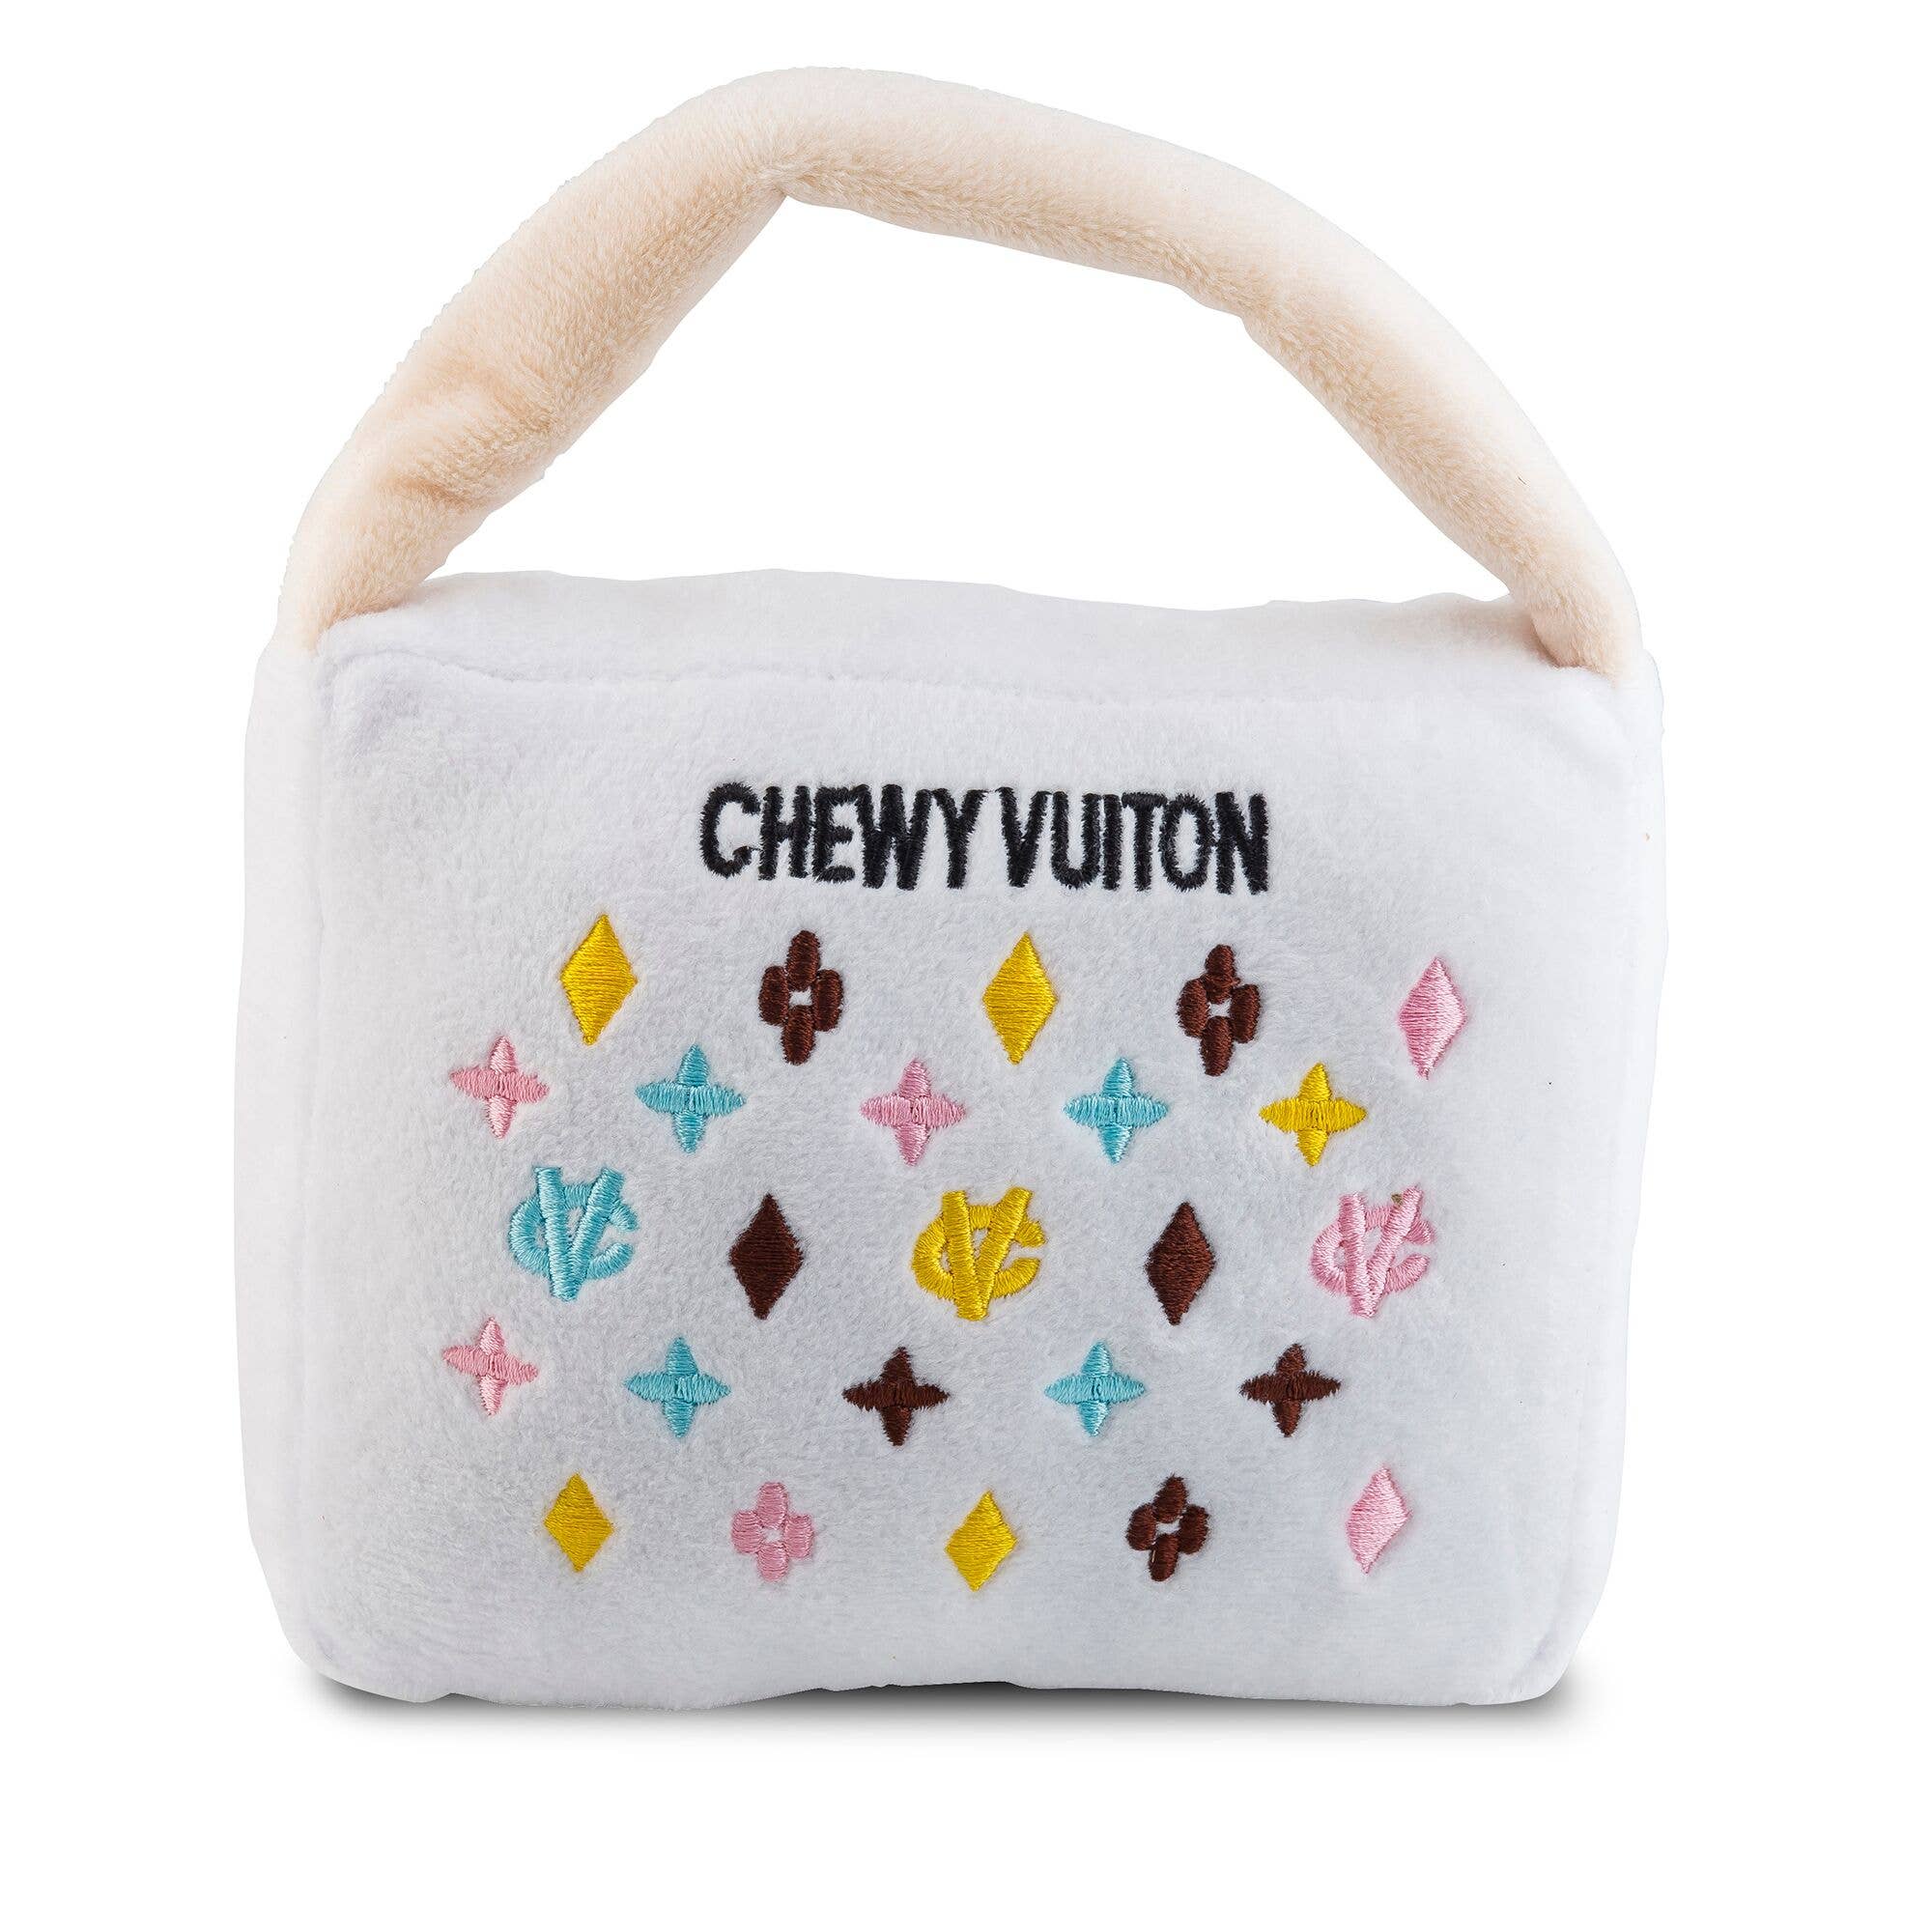 Pink Ombre Chewy Vuitton Bone